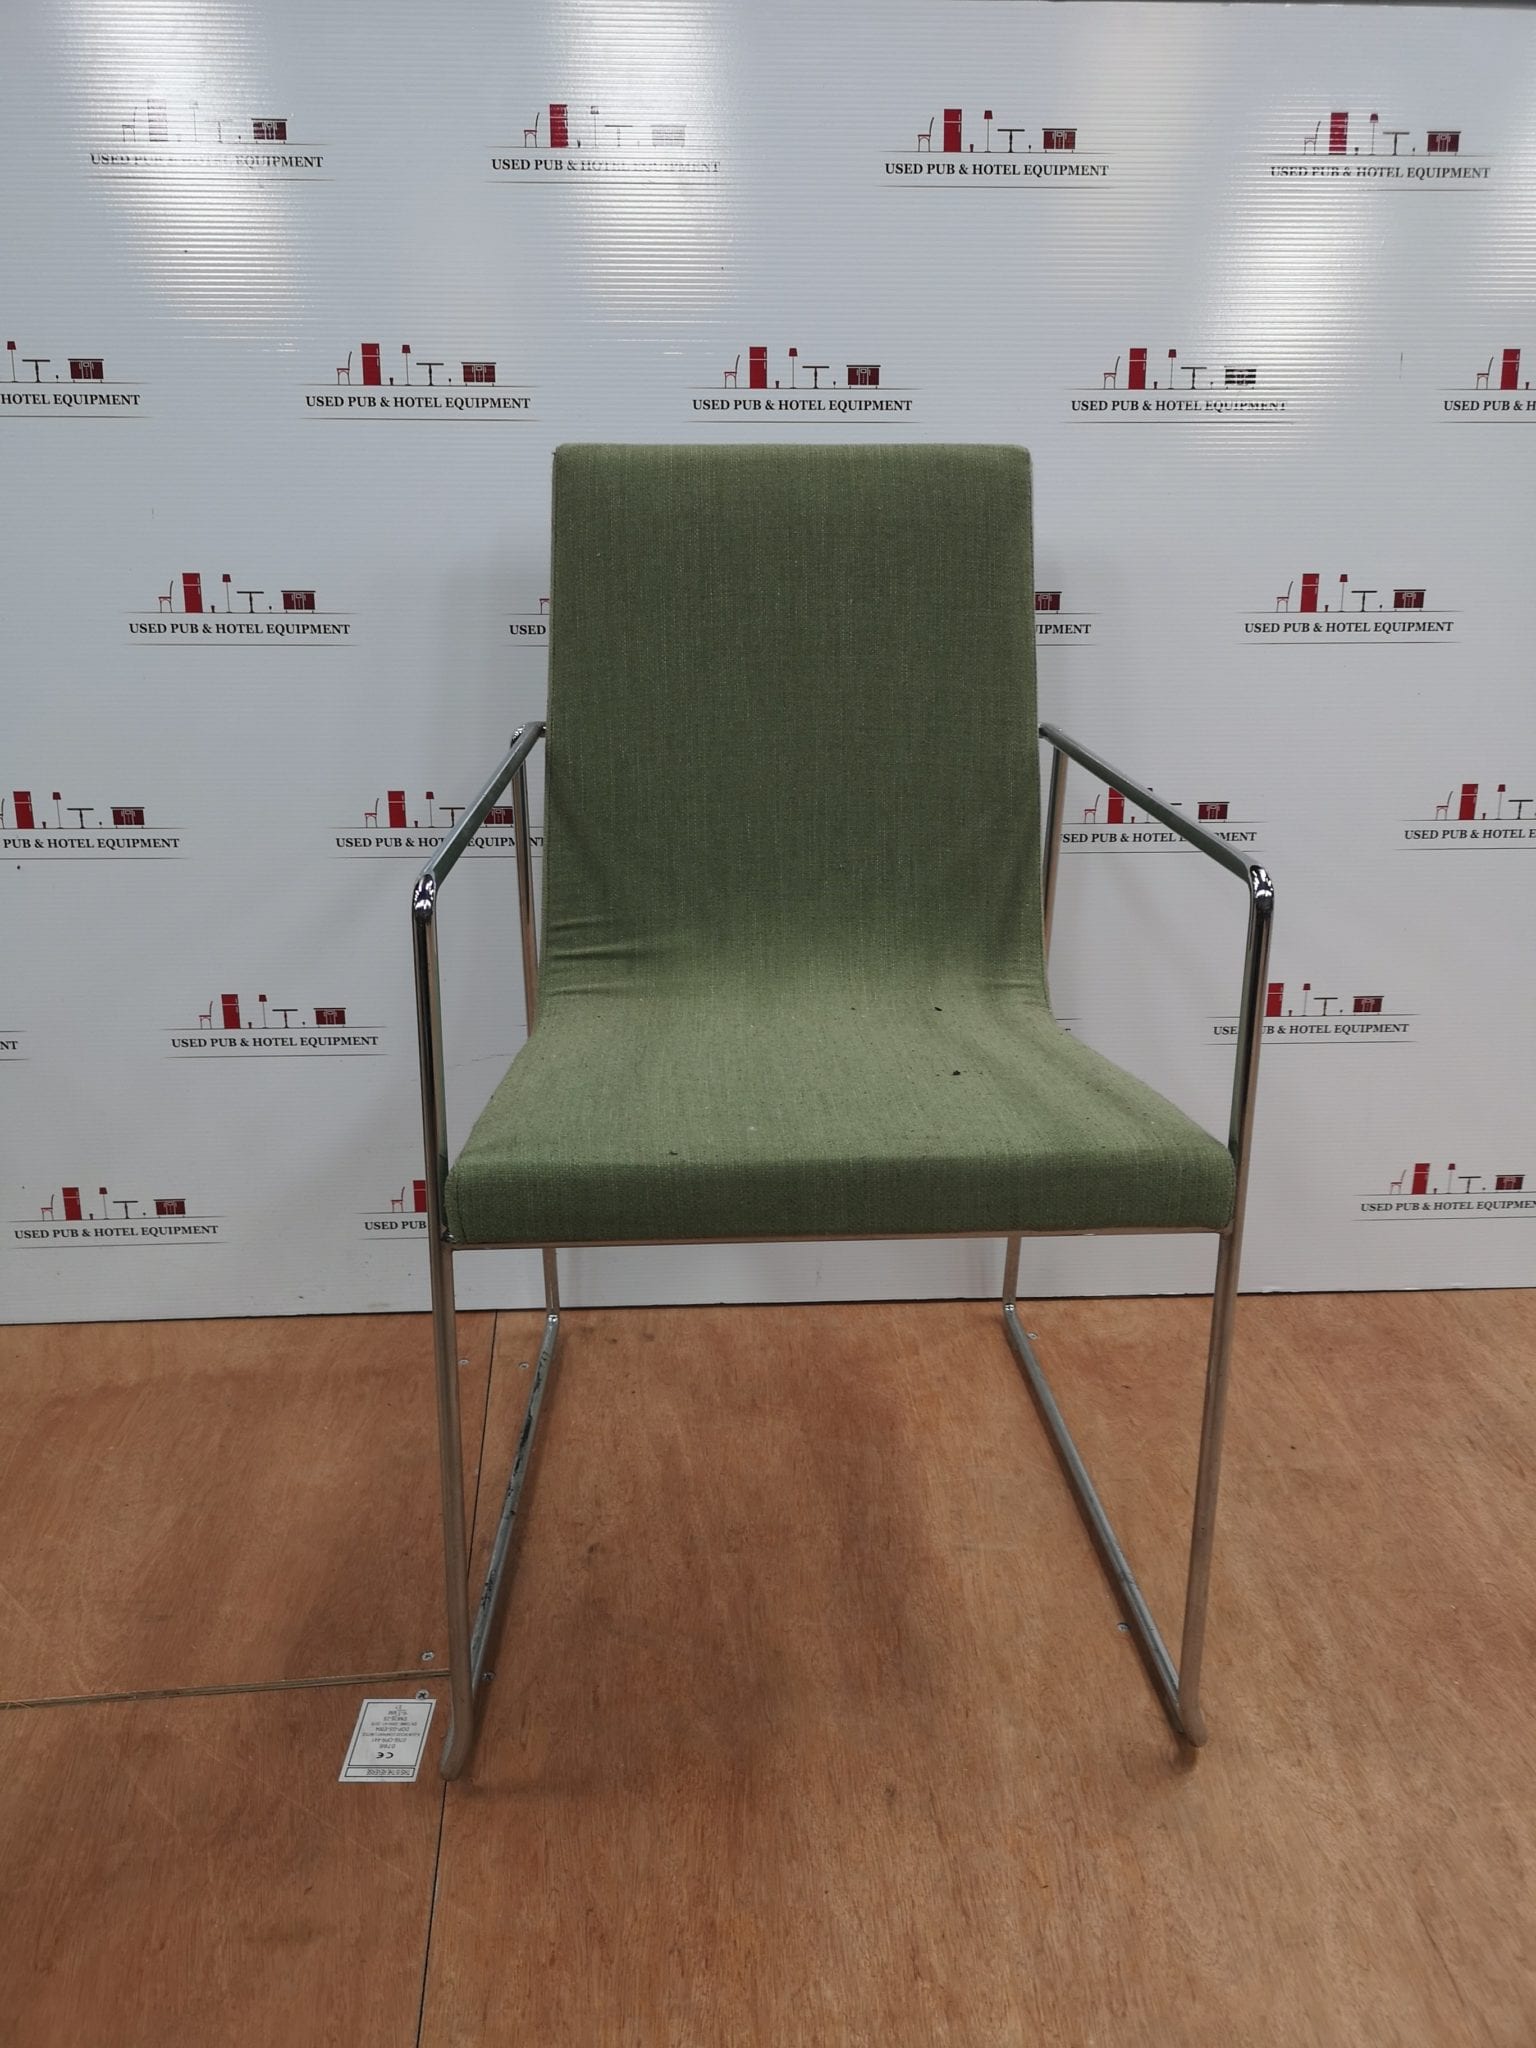 Green fabric lounge chairs - Used Pub and Hotel Equipment